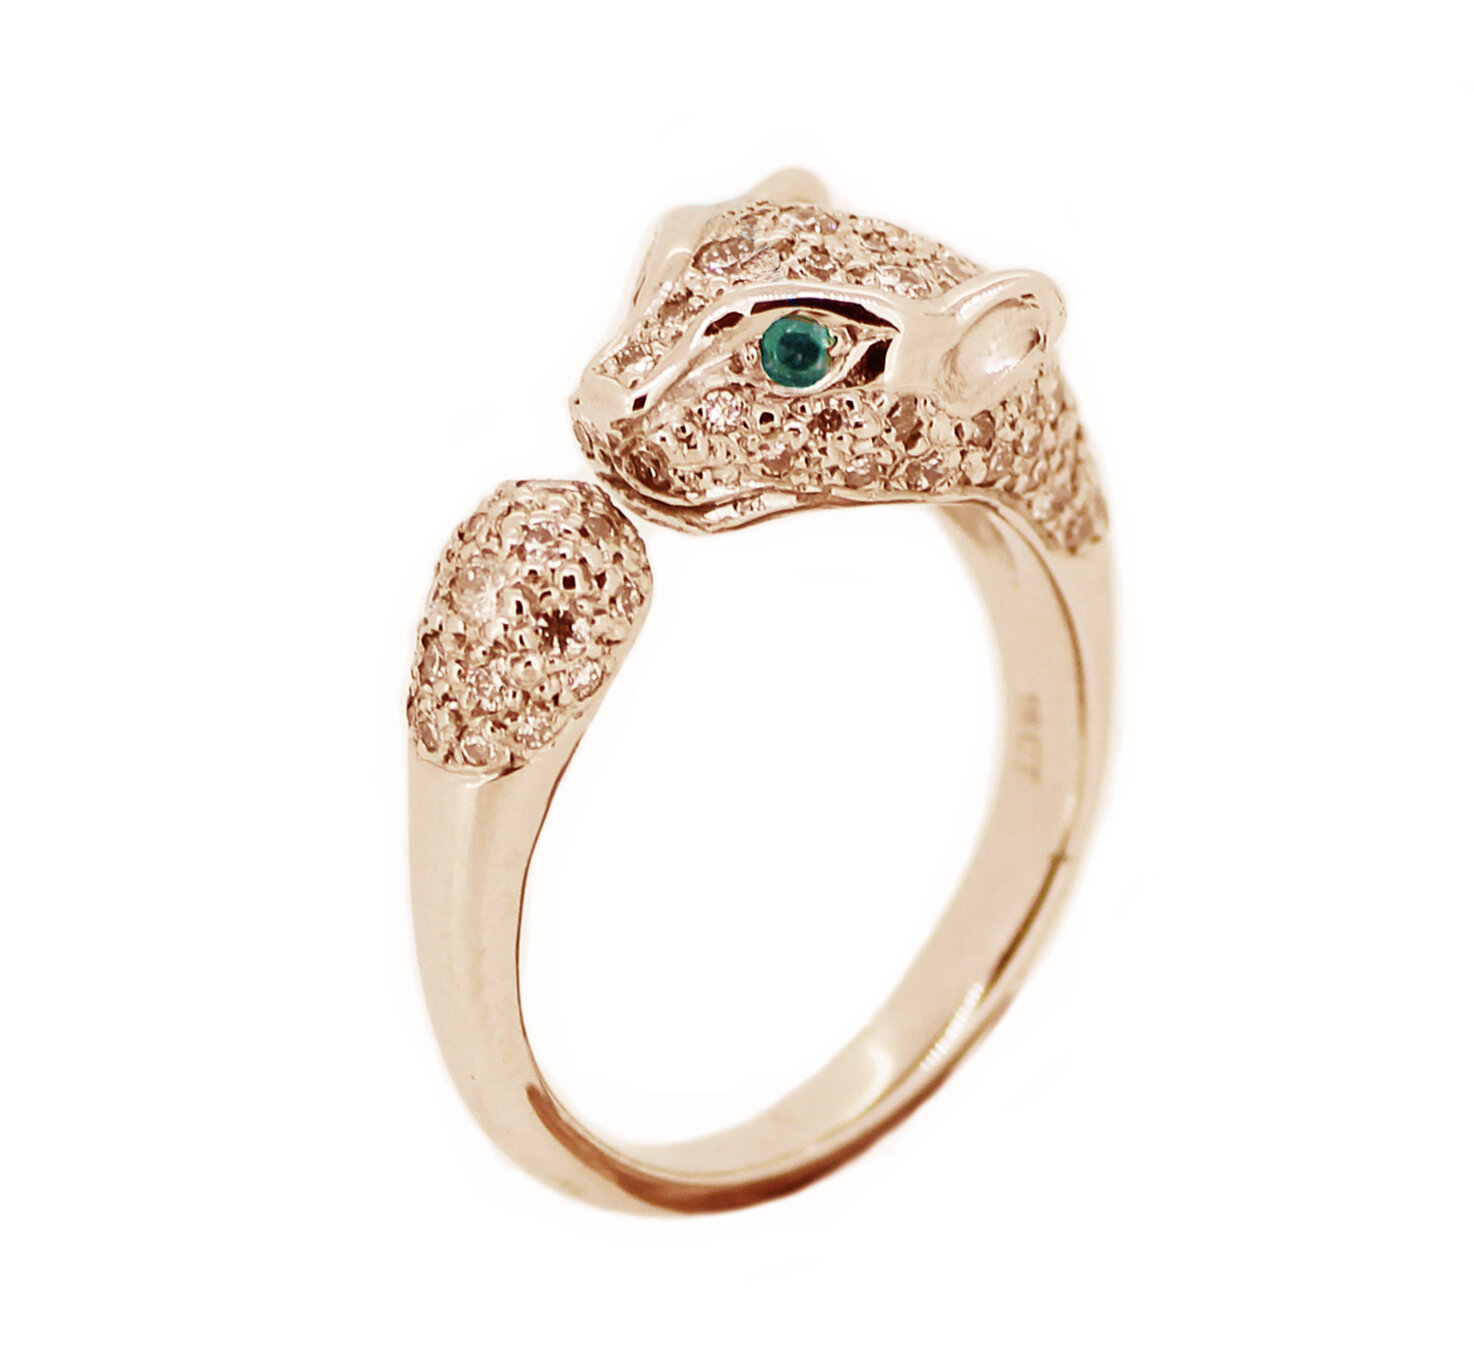 TORY & KO. Lioness Ring Rose Gold and Champagne Diamonds with Emerald Eyes.jpg